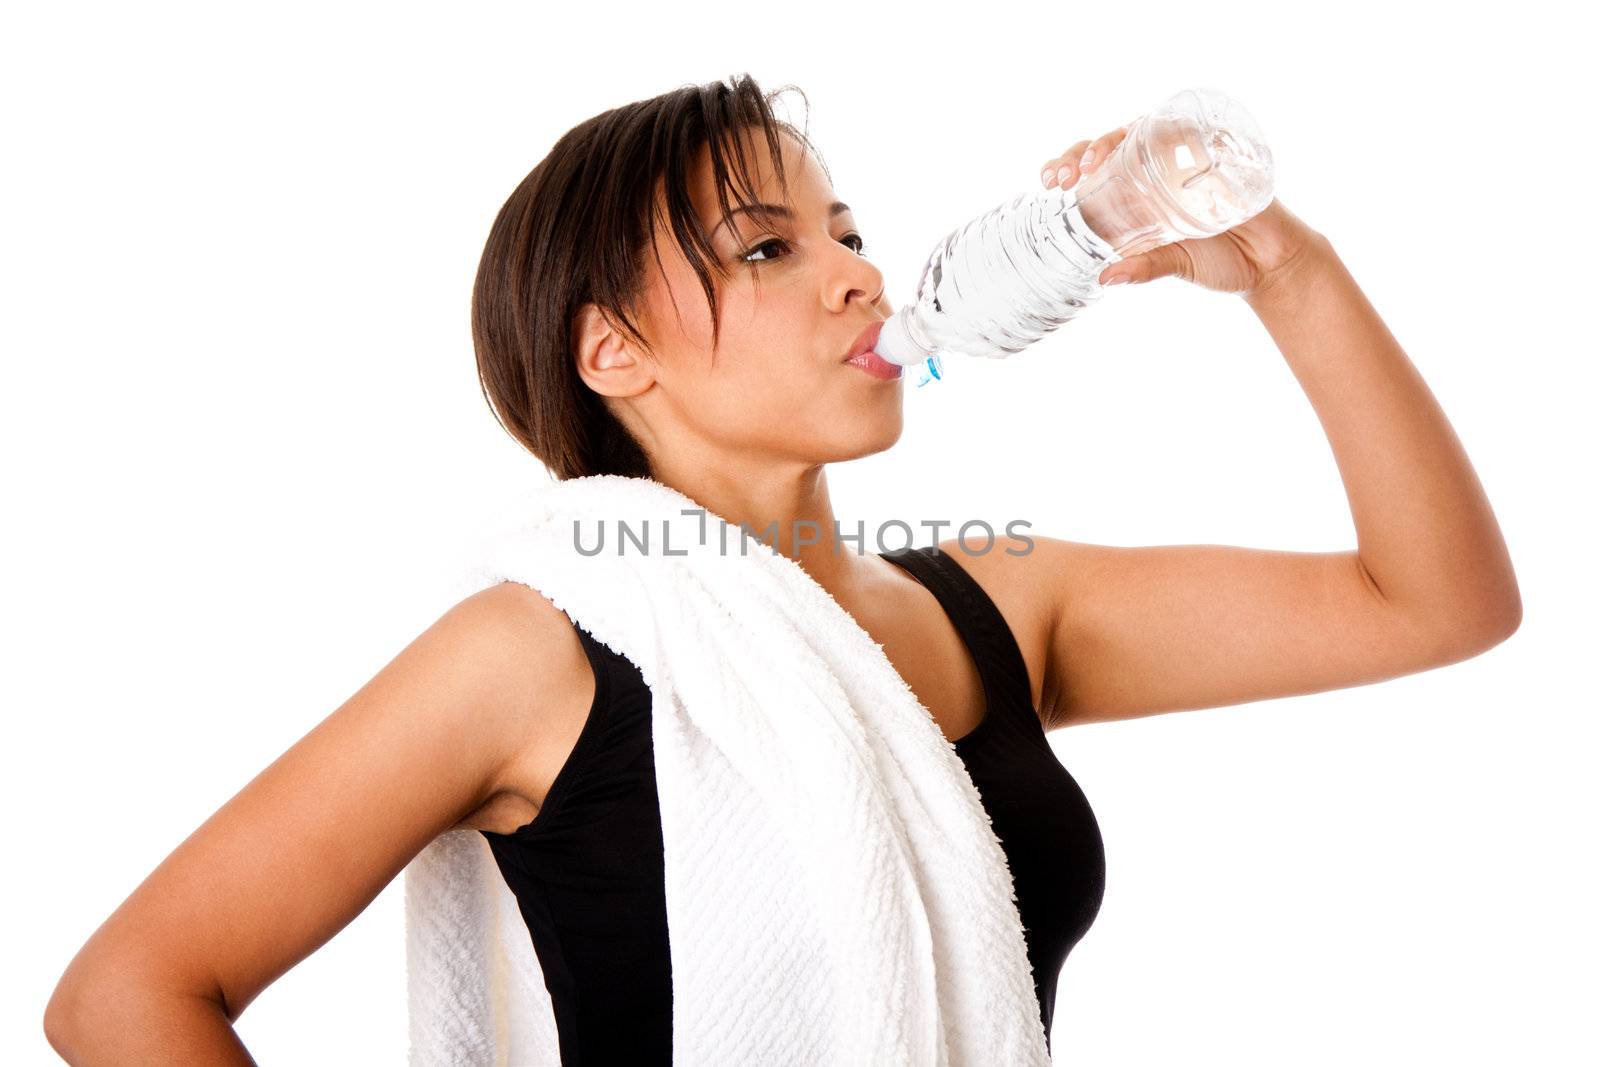 Rehydrating drinking water after workout by phakimata